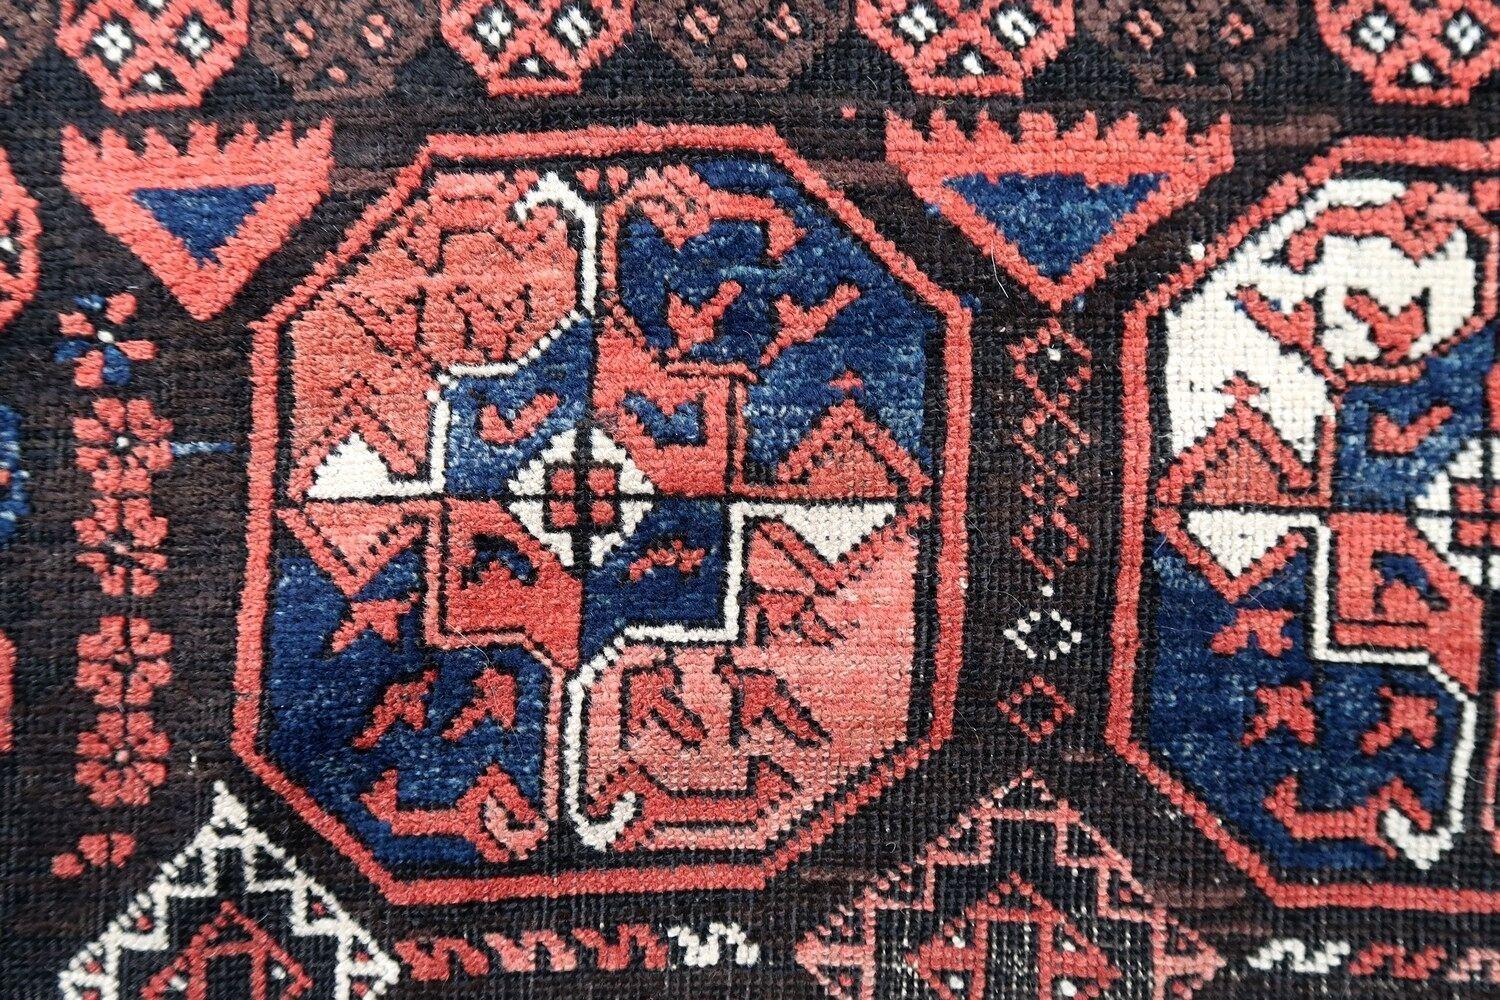 Handmade antique Baluch rug from Afghanistan in original condition, it has some signs of age. The rug is from the beginning of the 20th century.

- Condition: original, some signs of age,

- circa 1900s,

- Size: 3.3' x 5.8' (101cm x